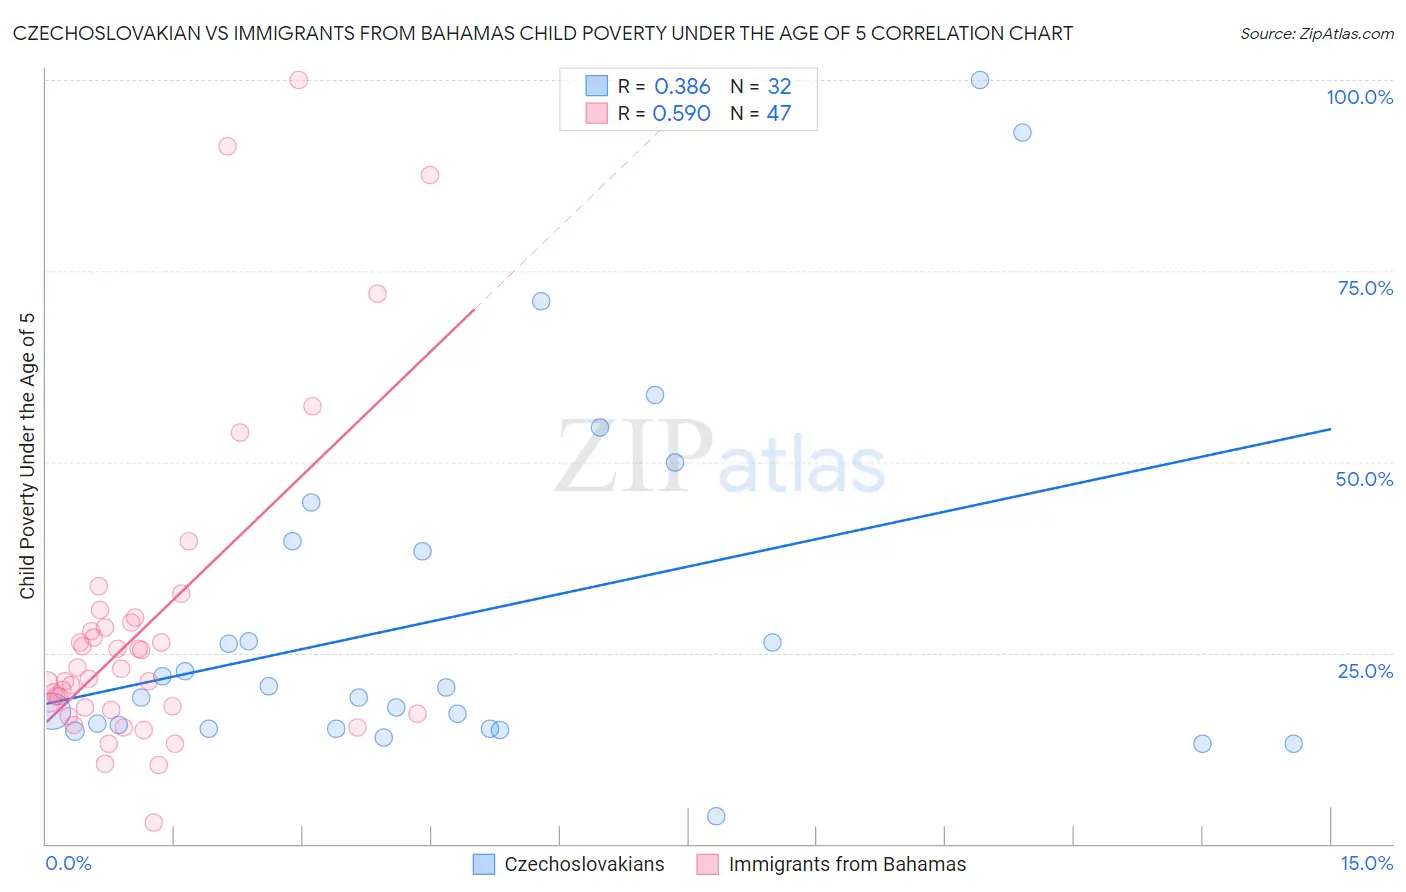 Czechoslovakian vs Immigrants from Bahamas Child Poverty Under the Age of 5